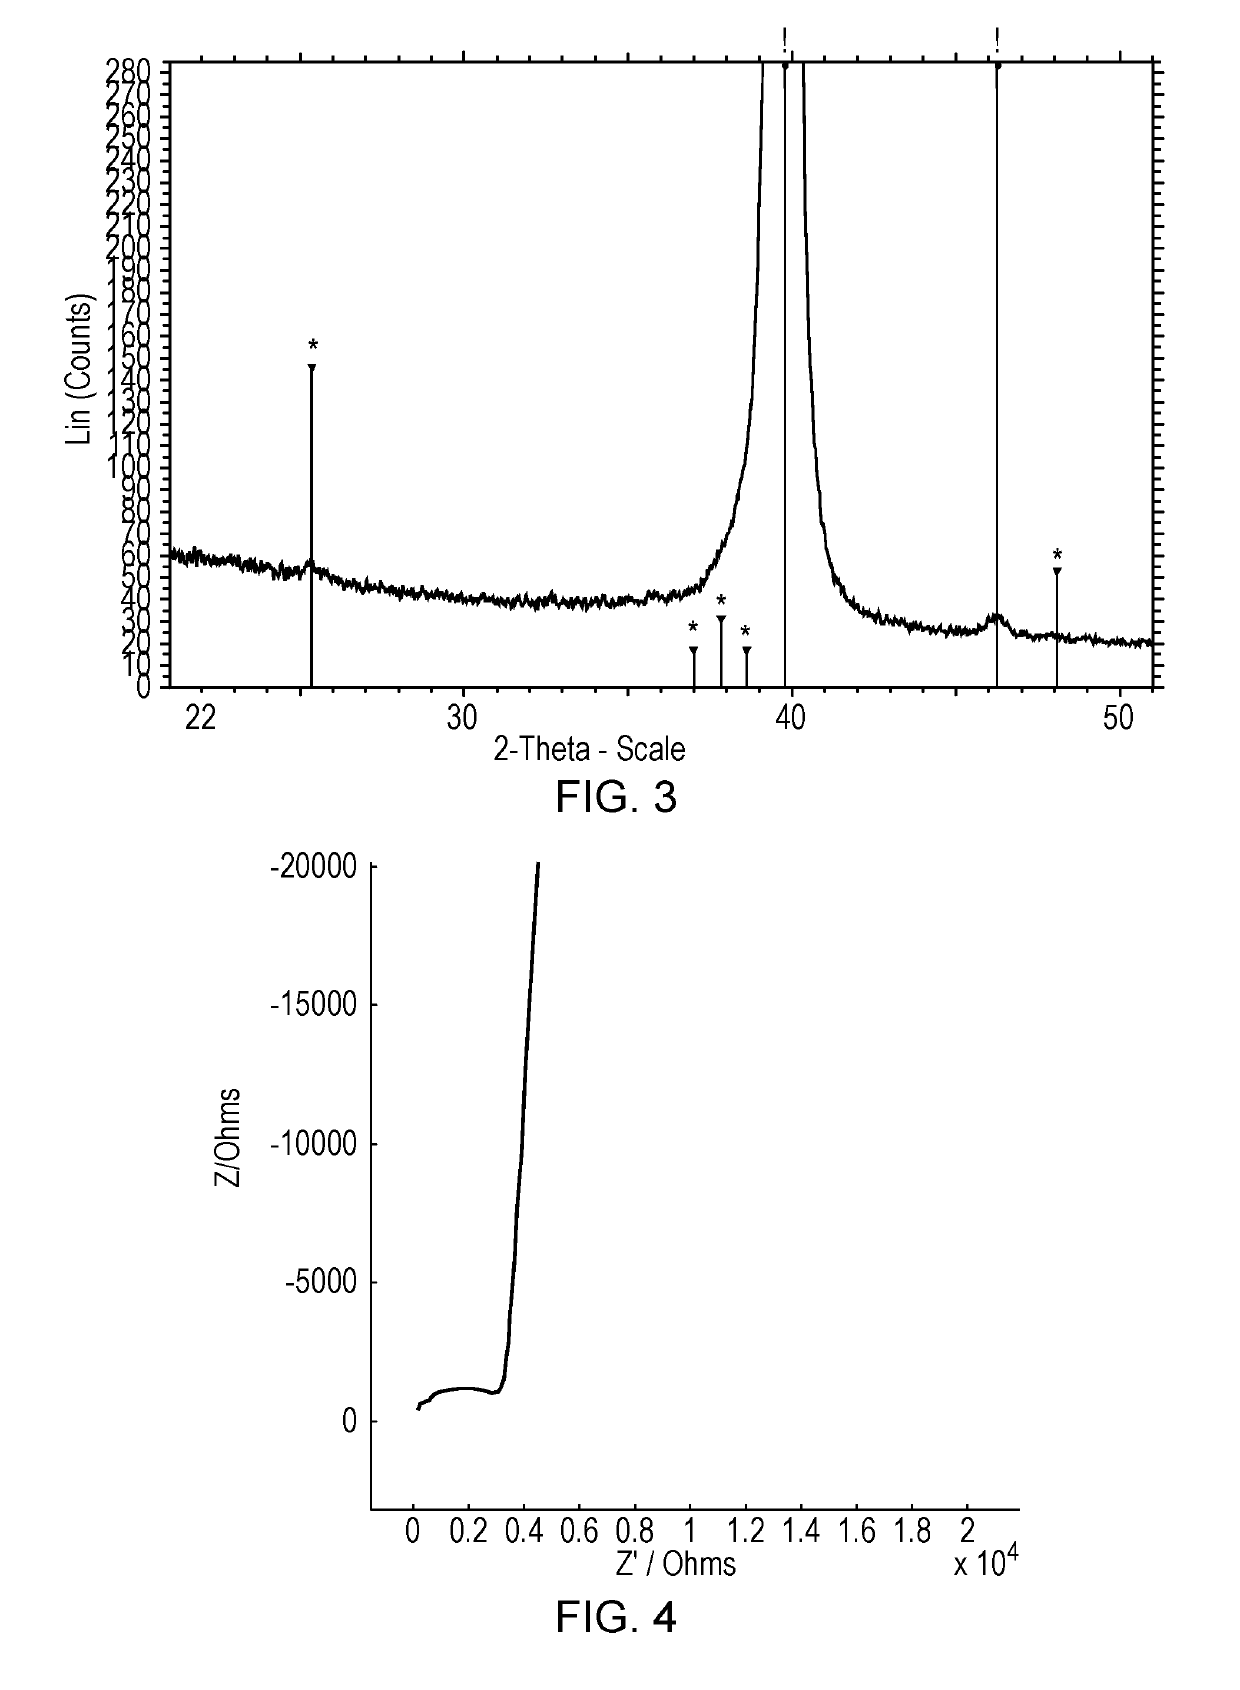 Vapour deposition method for fabricating lithium-containing thin film layered structures